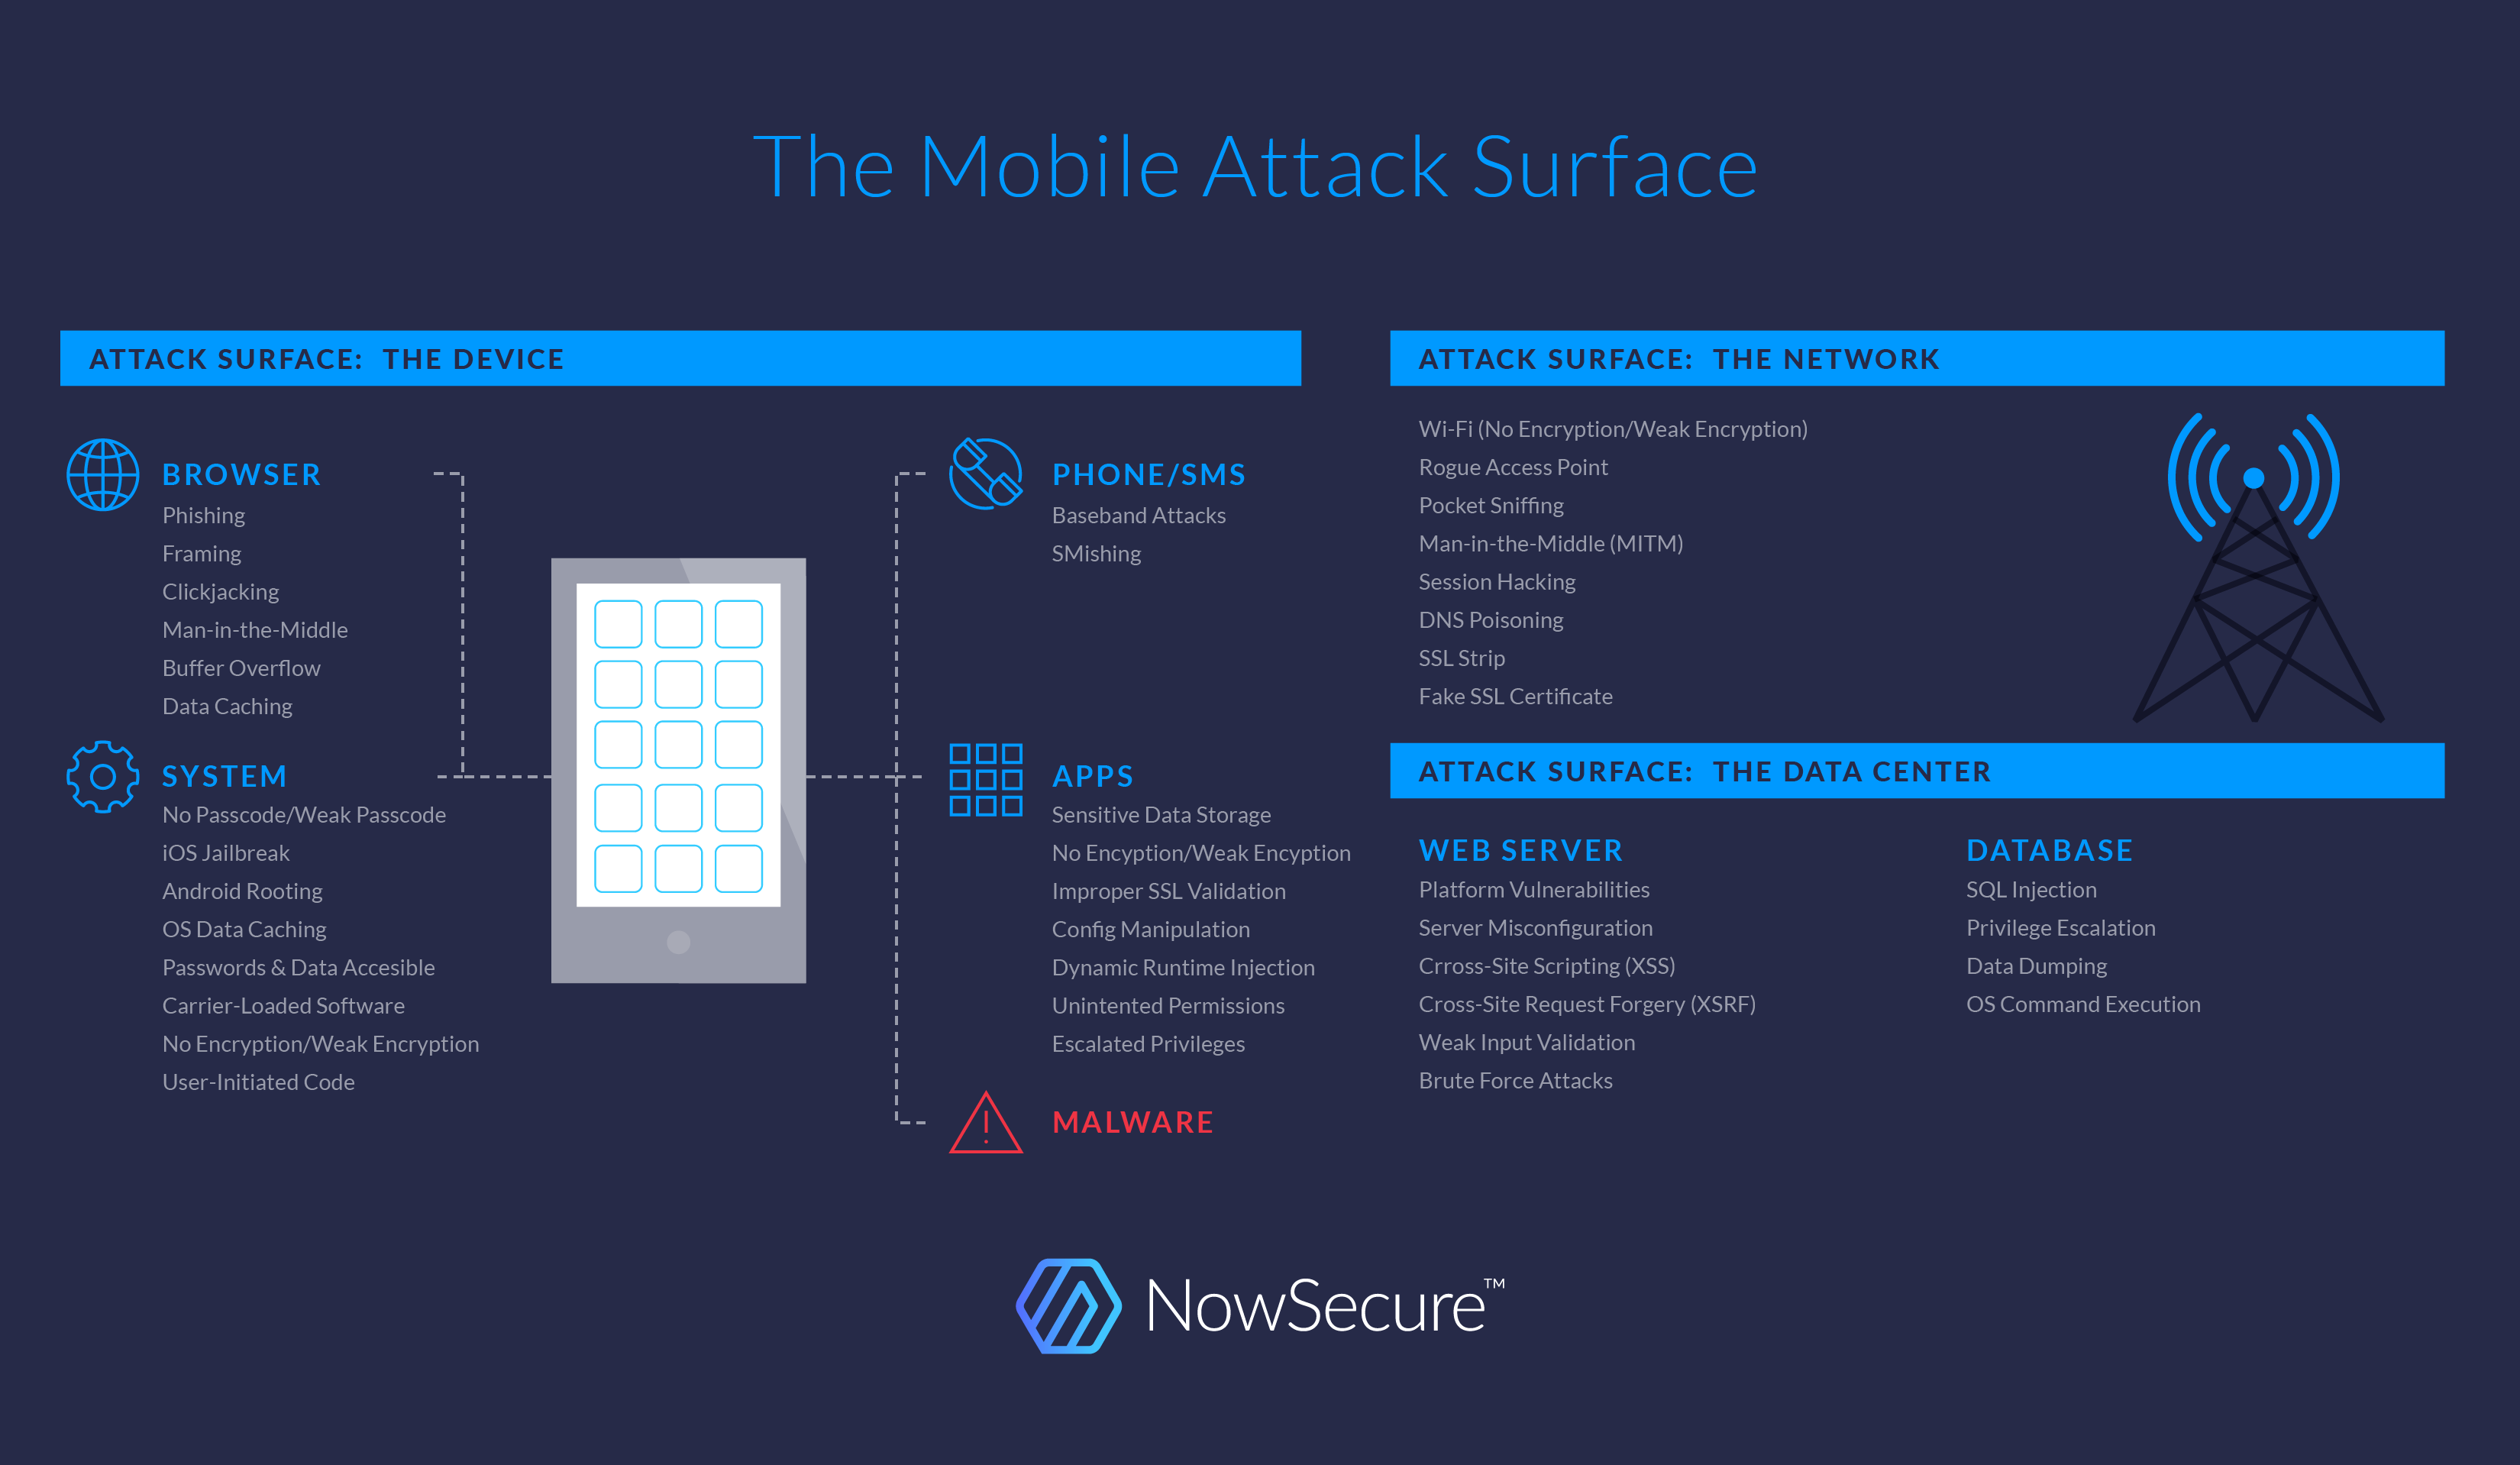 Anatomy of a Mobile Attack